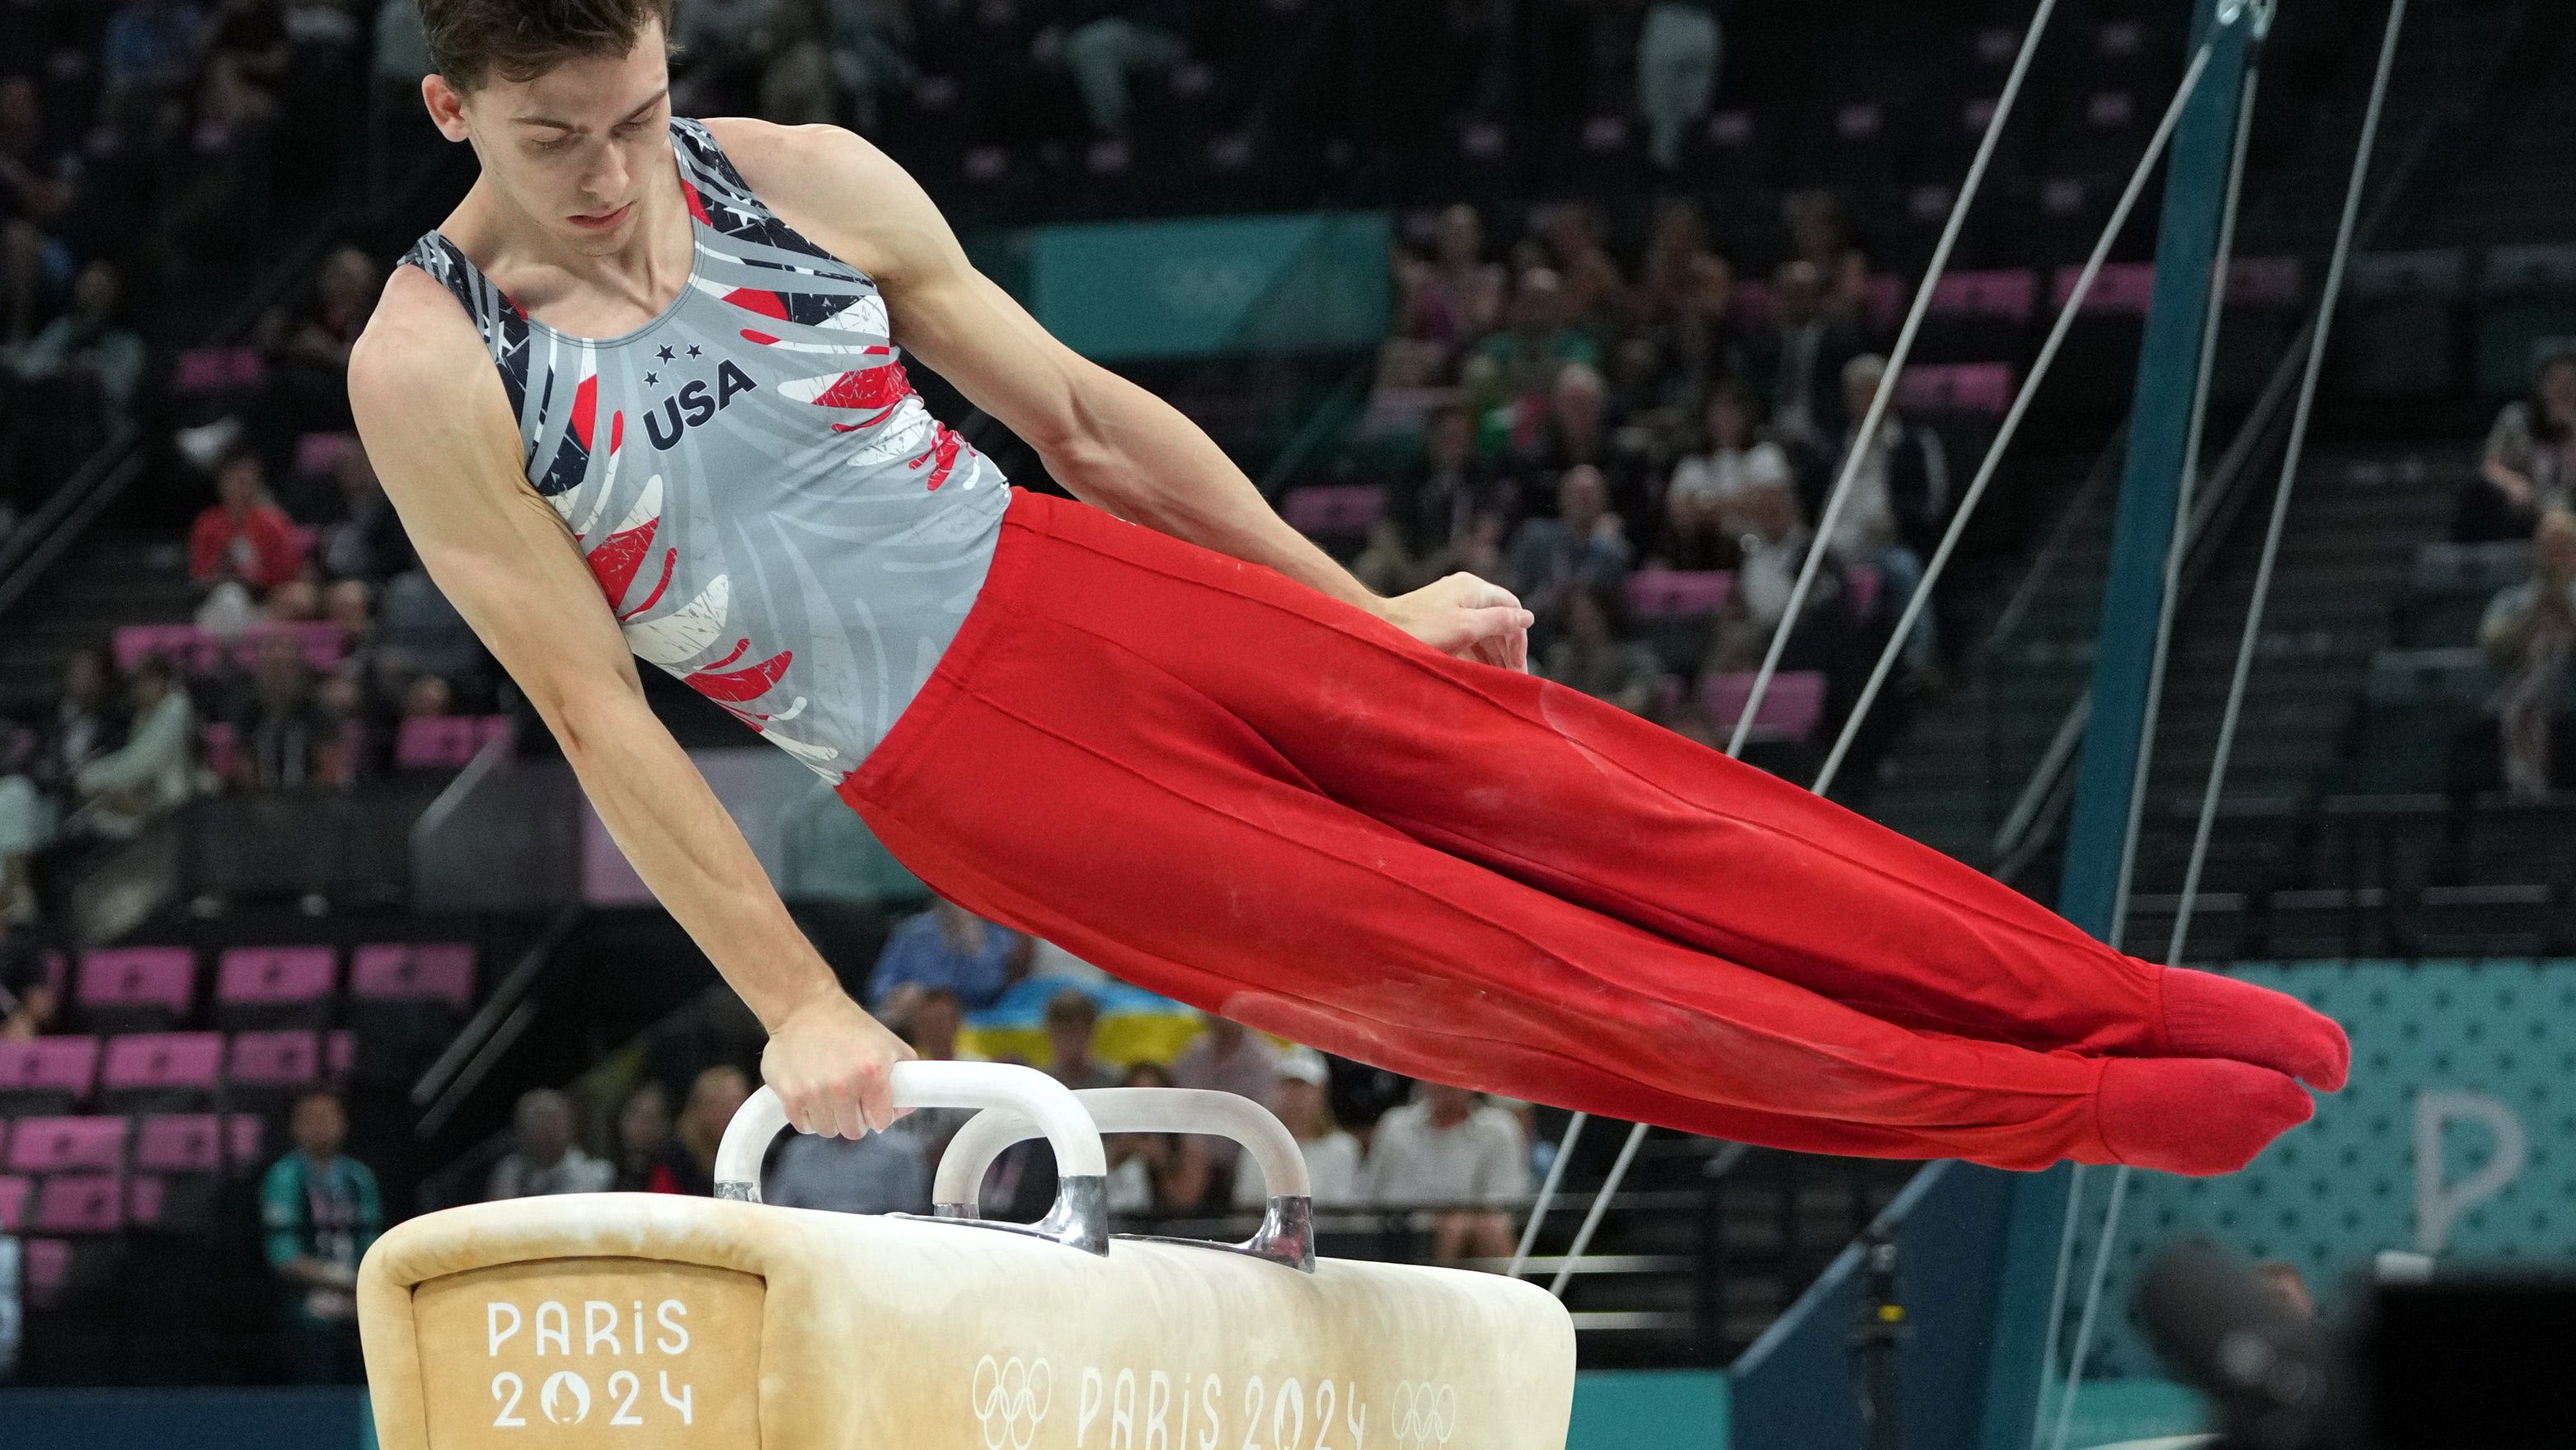 Pommel horse guy stuns Olympic fans; what to know about Stephen Nedoroscik